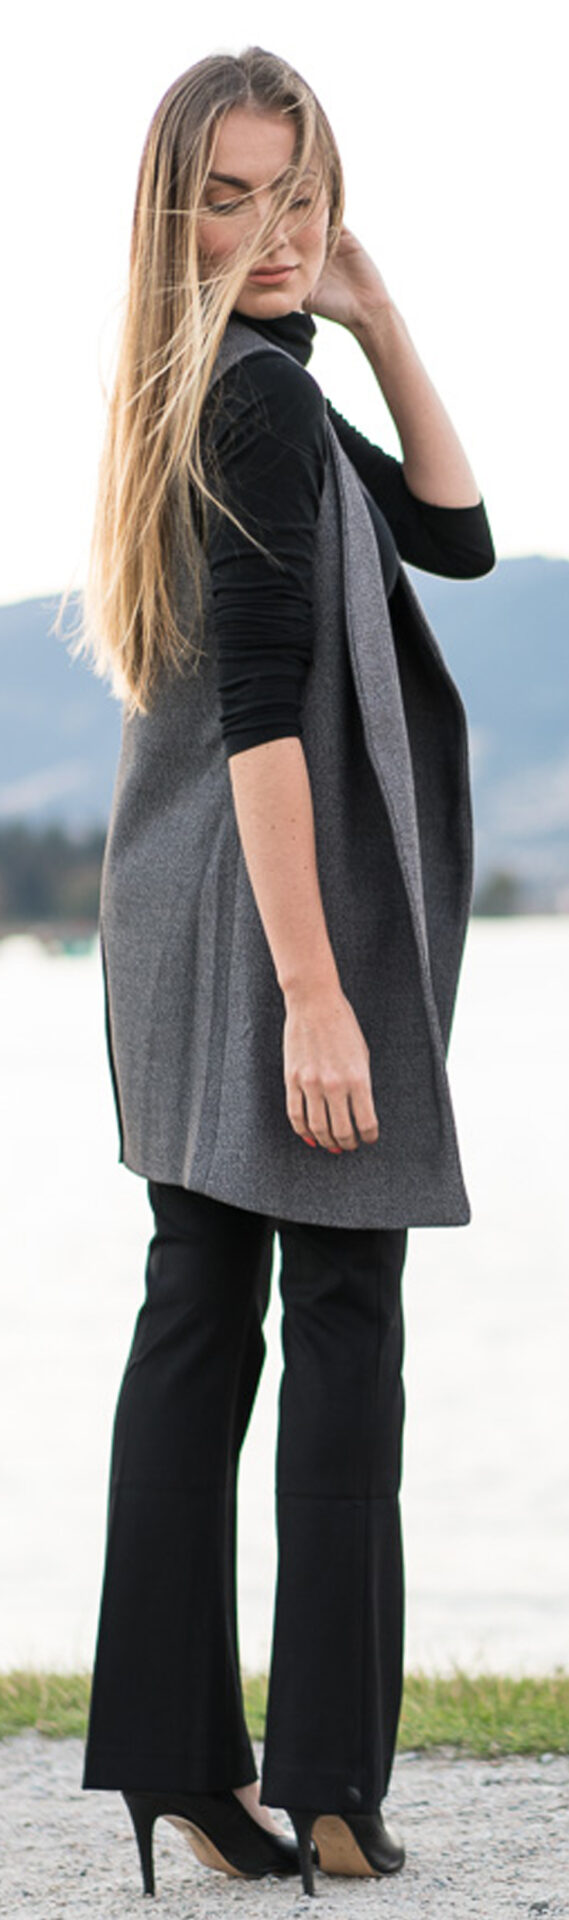 Fall Petit Style - Black total look with a simple gray vest. Angela Lanter - Hello Gorgeous